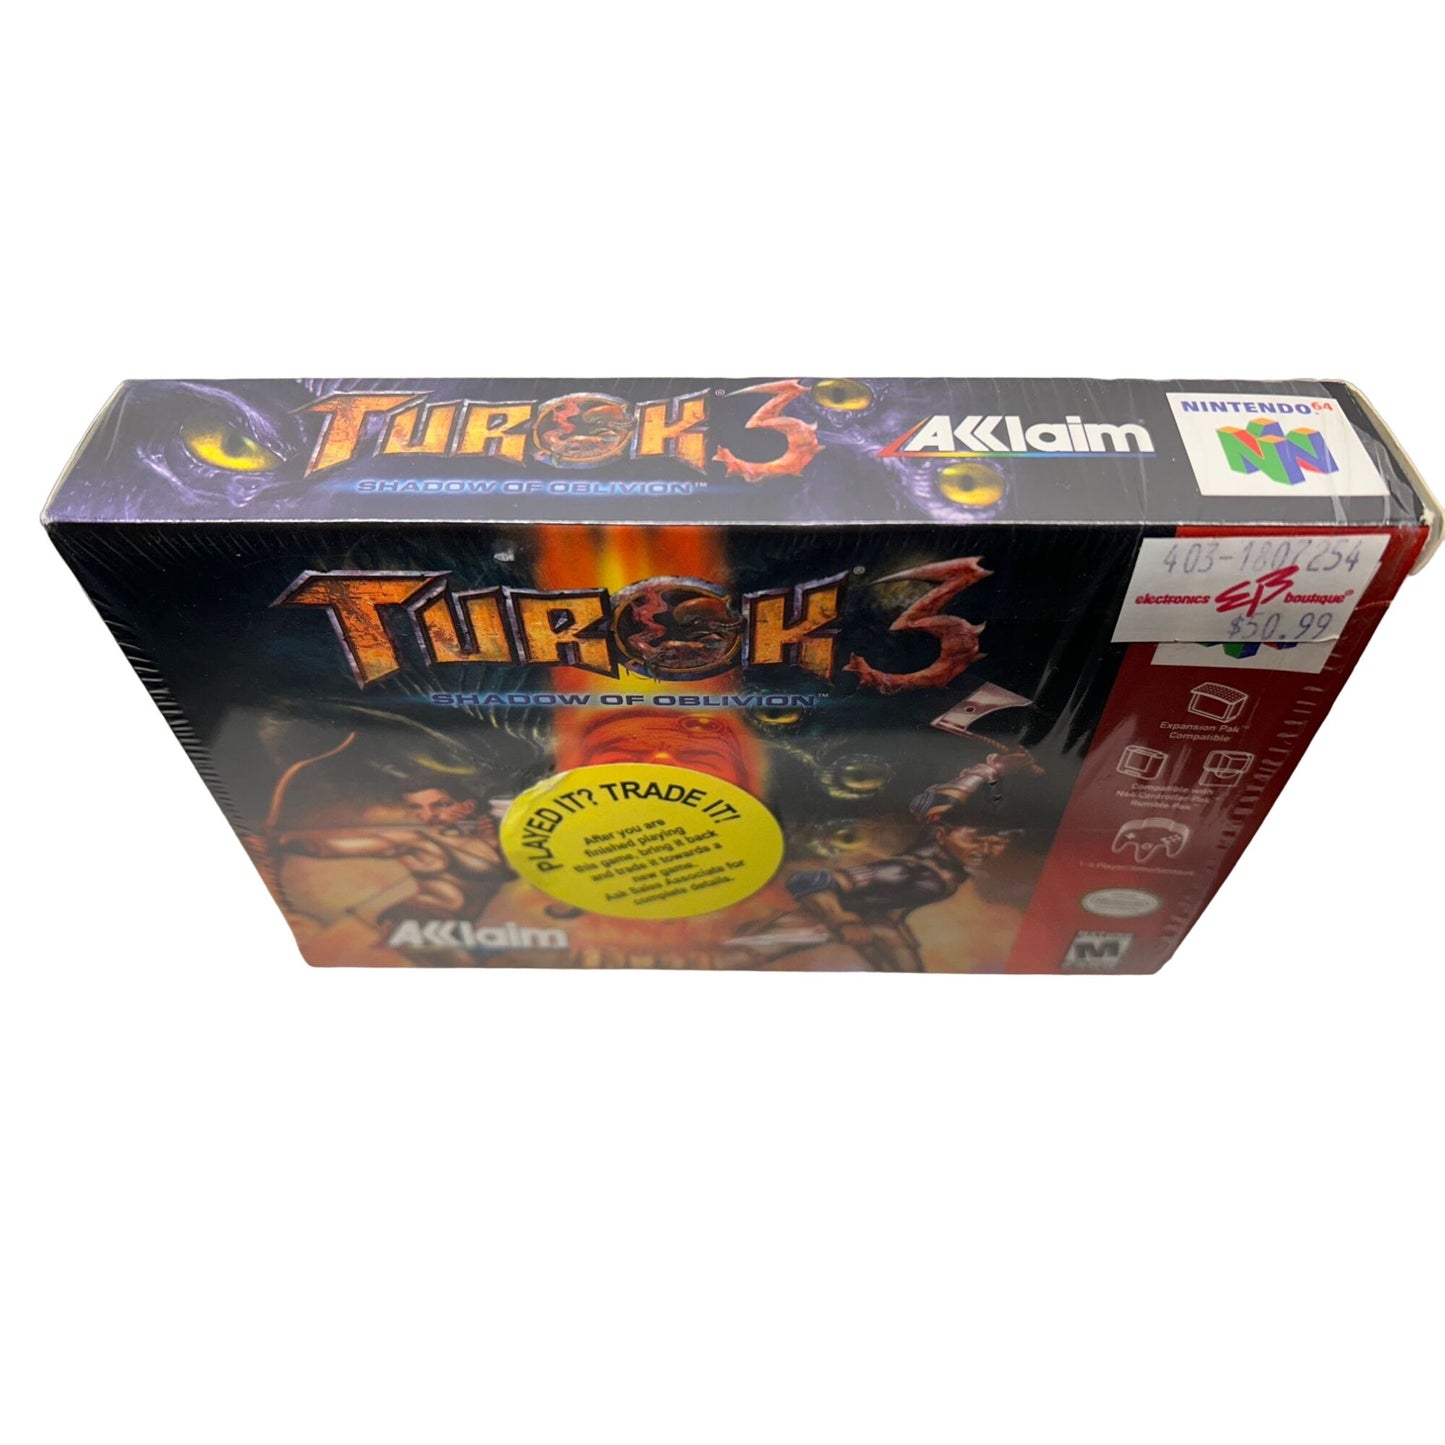 Turok 3: Shadow of Oblivion (N64, 2000) CIB Complete w/ Manuals TESTED WORKING